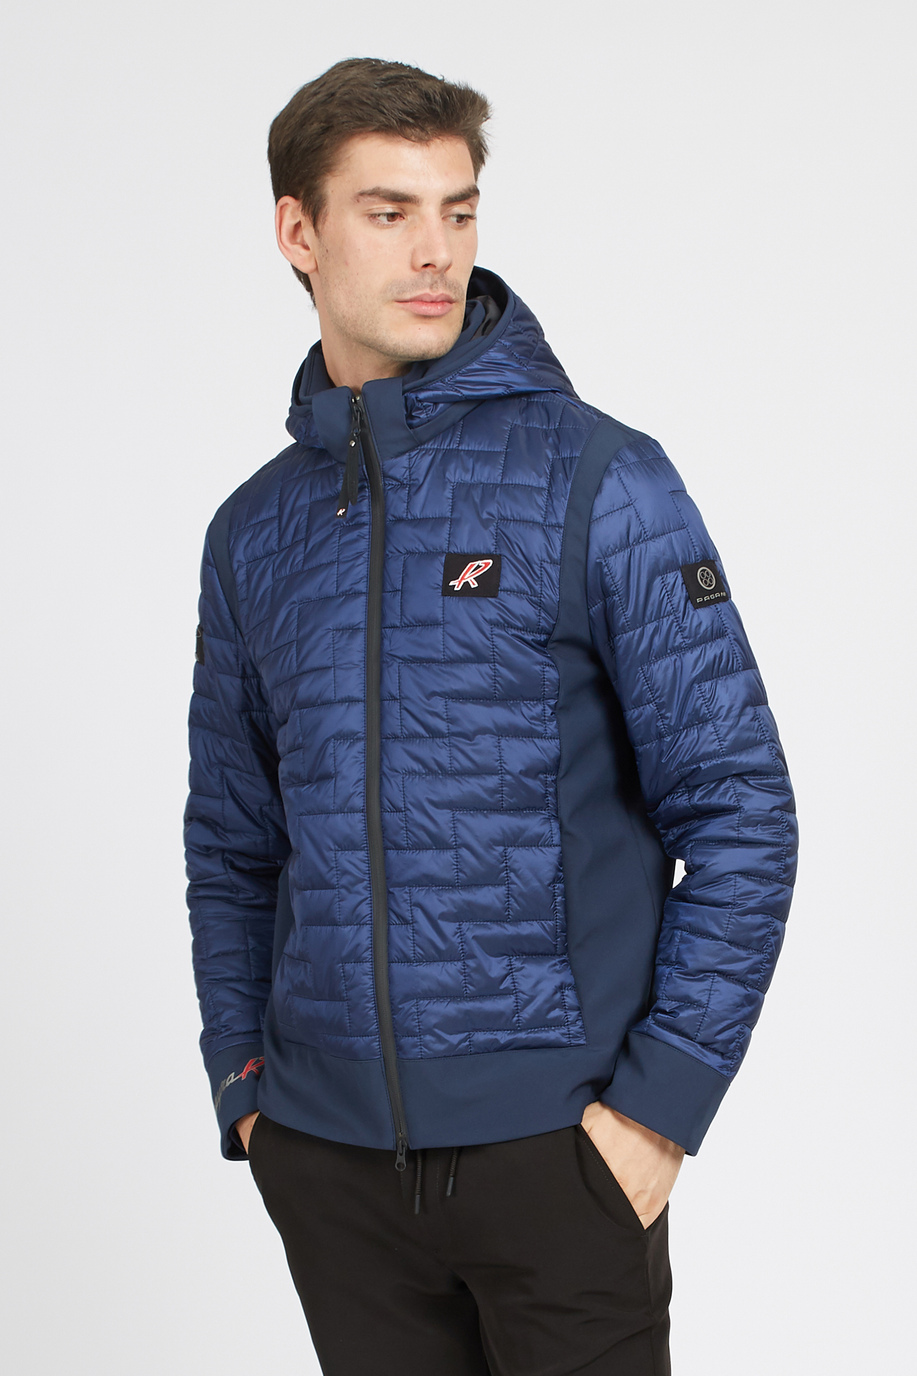 Men’s down jacket Pagani with hood regular fit - Outerwear and Jackets | La Martina - Official Online Shop